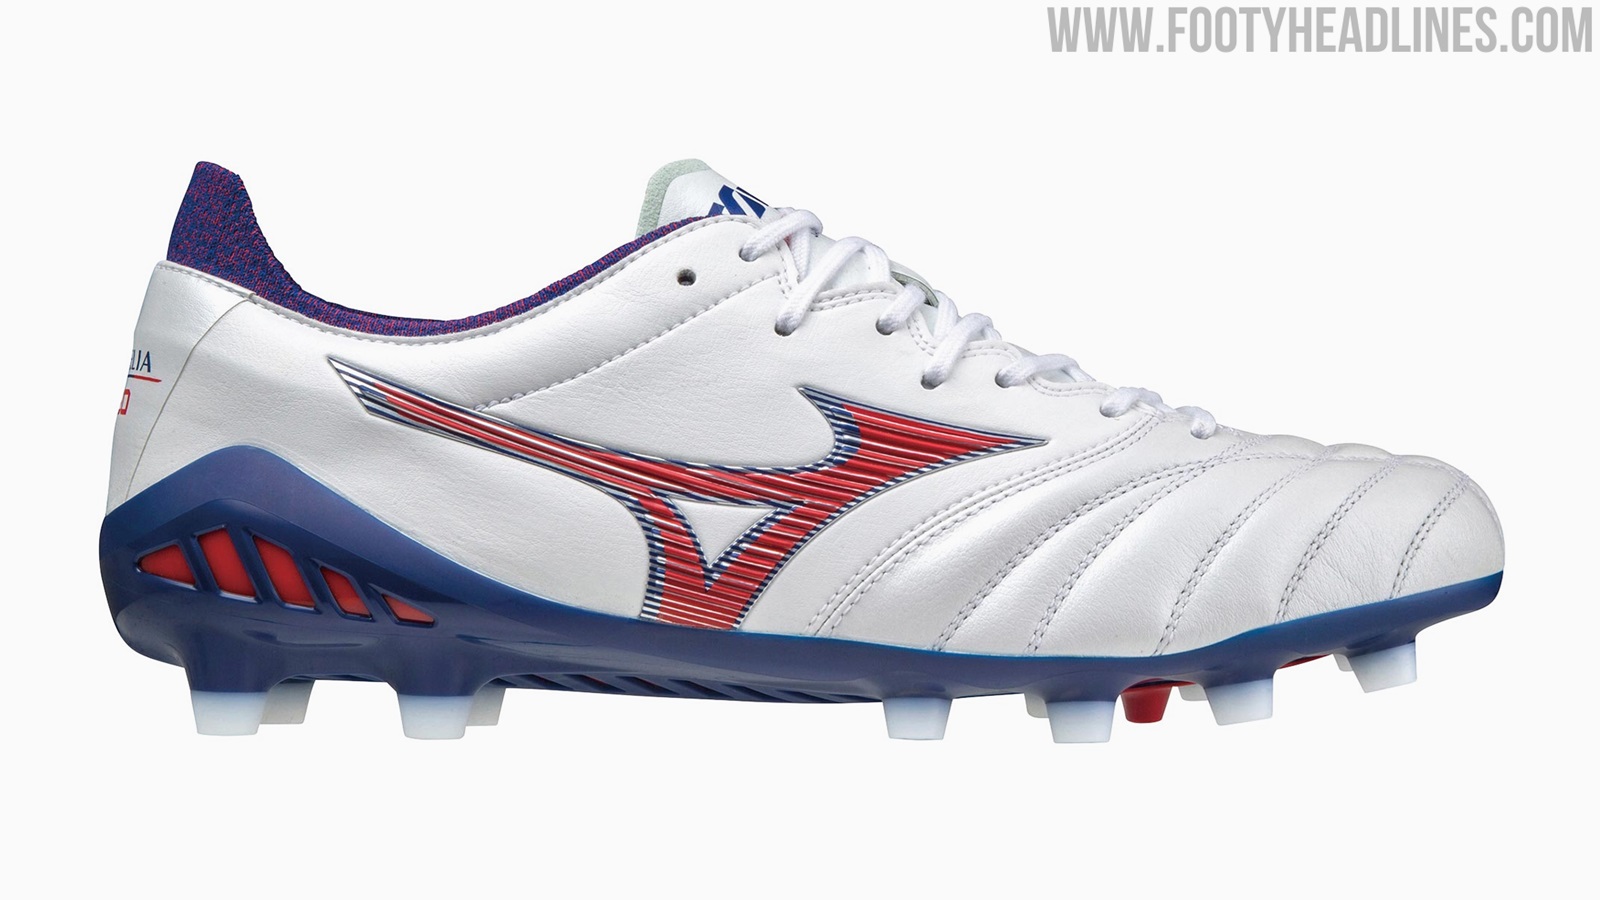 Mizuno 'Next Wave Color' Boots Pack Released - Footy Headlines